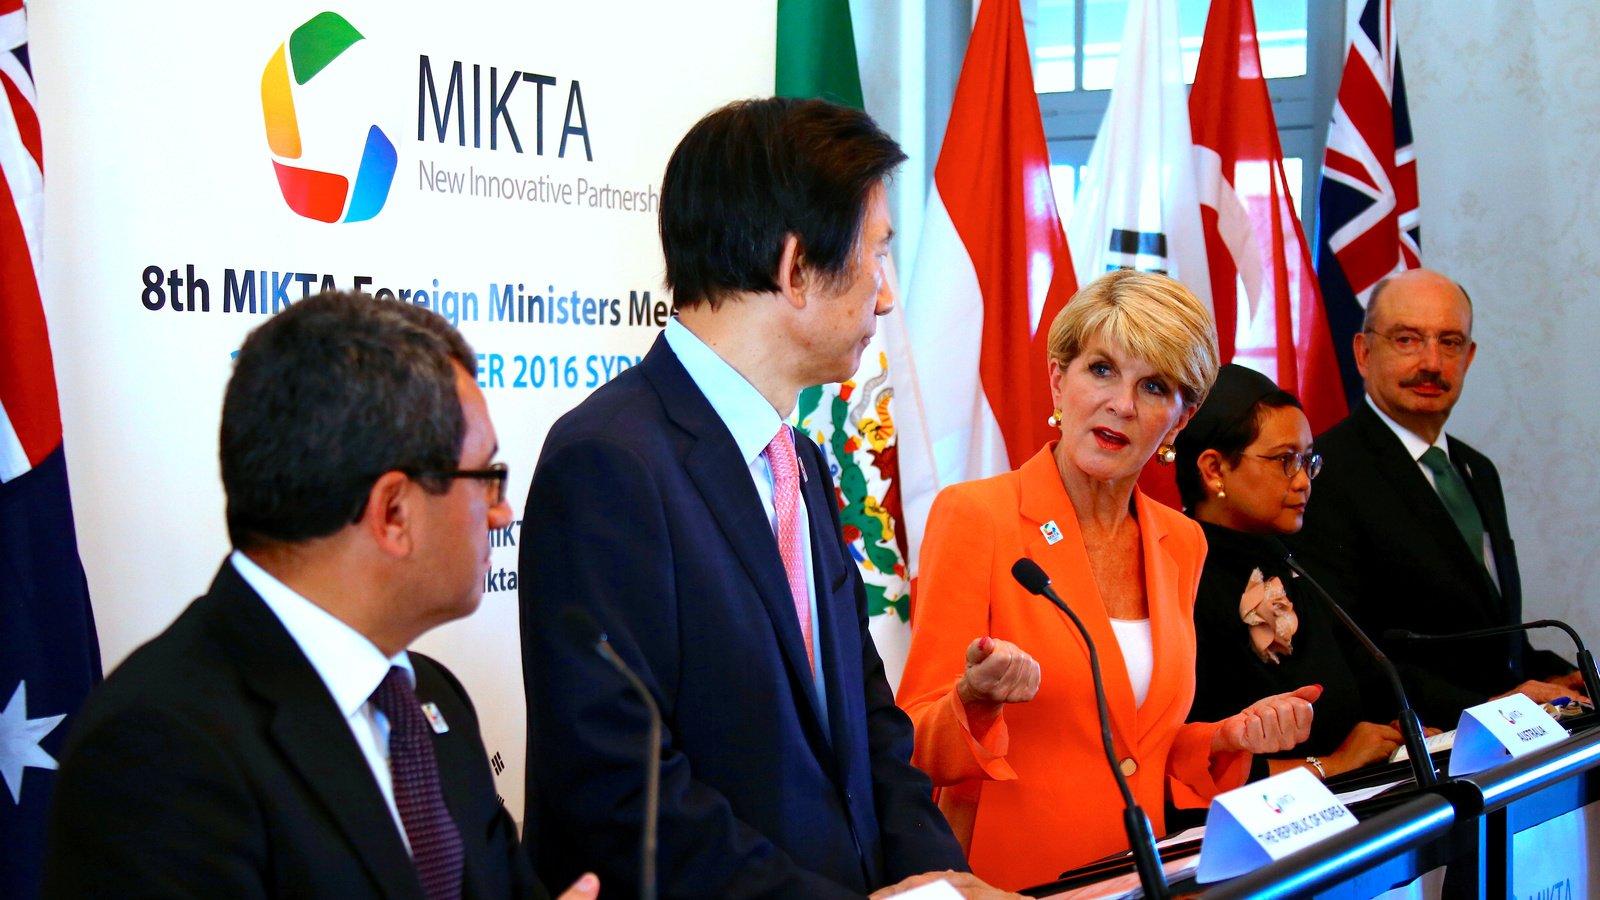 MITKA member foreign ministers at 2018 media event